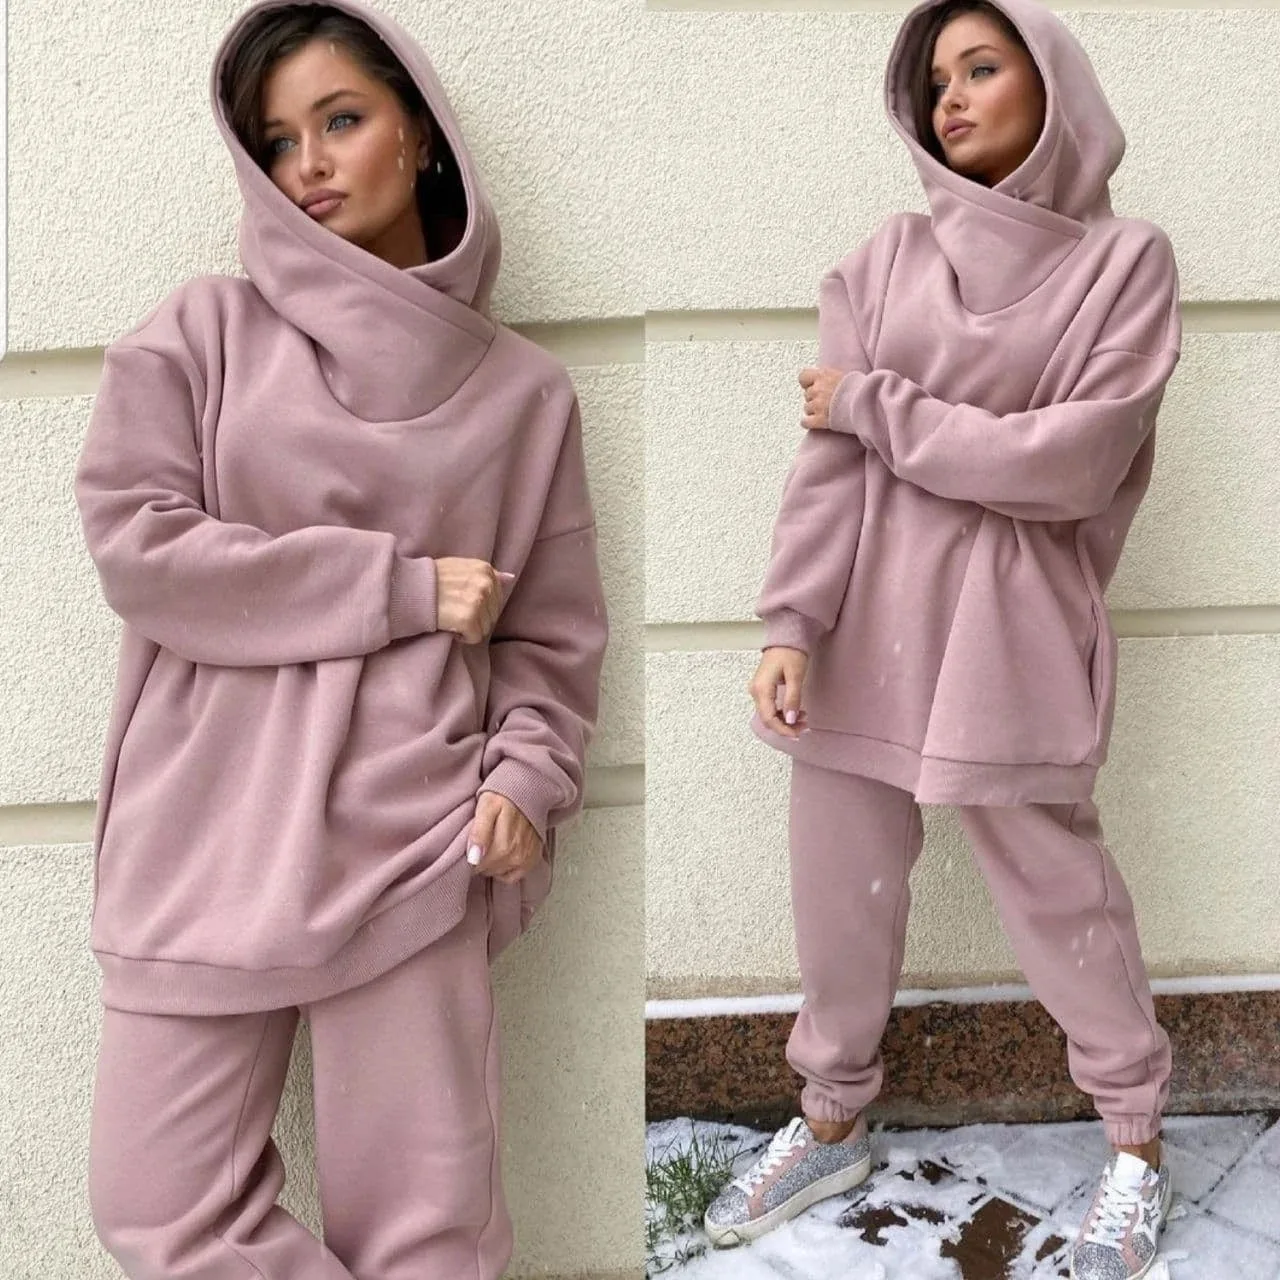 2024 Spring Women Suit Tracksuit Long Sleeve Pocket Hoodies Loose Pants Set Female Winter Warm Thicken Casual Sport Set Lady hoodies aztec geometric snap button pocket hoodie in gray size l m s